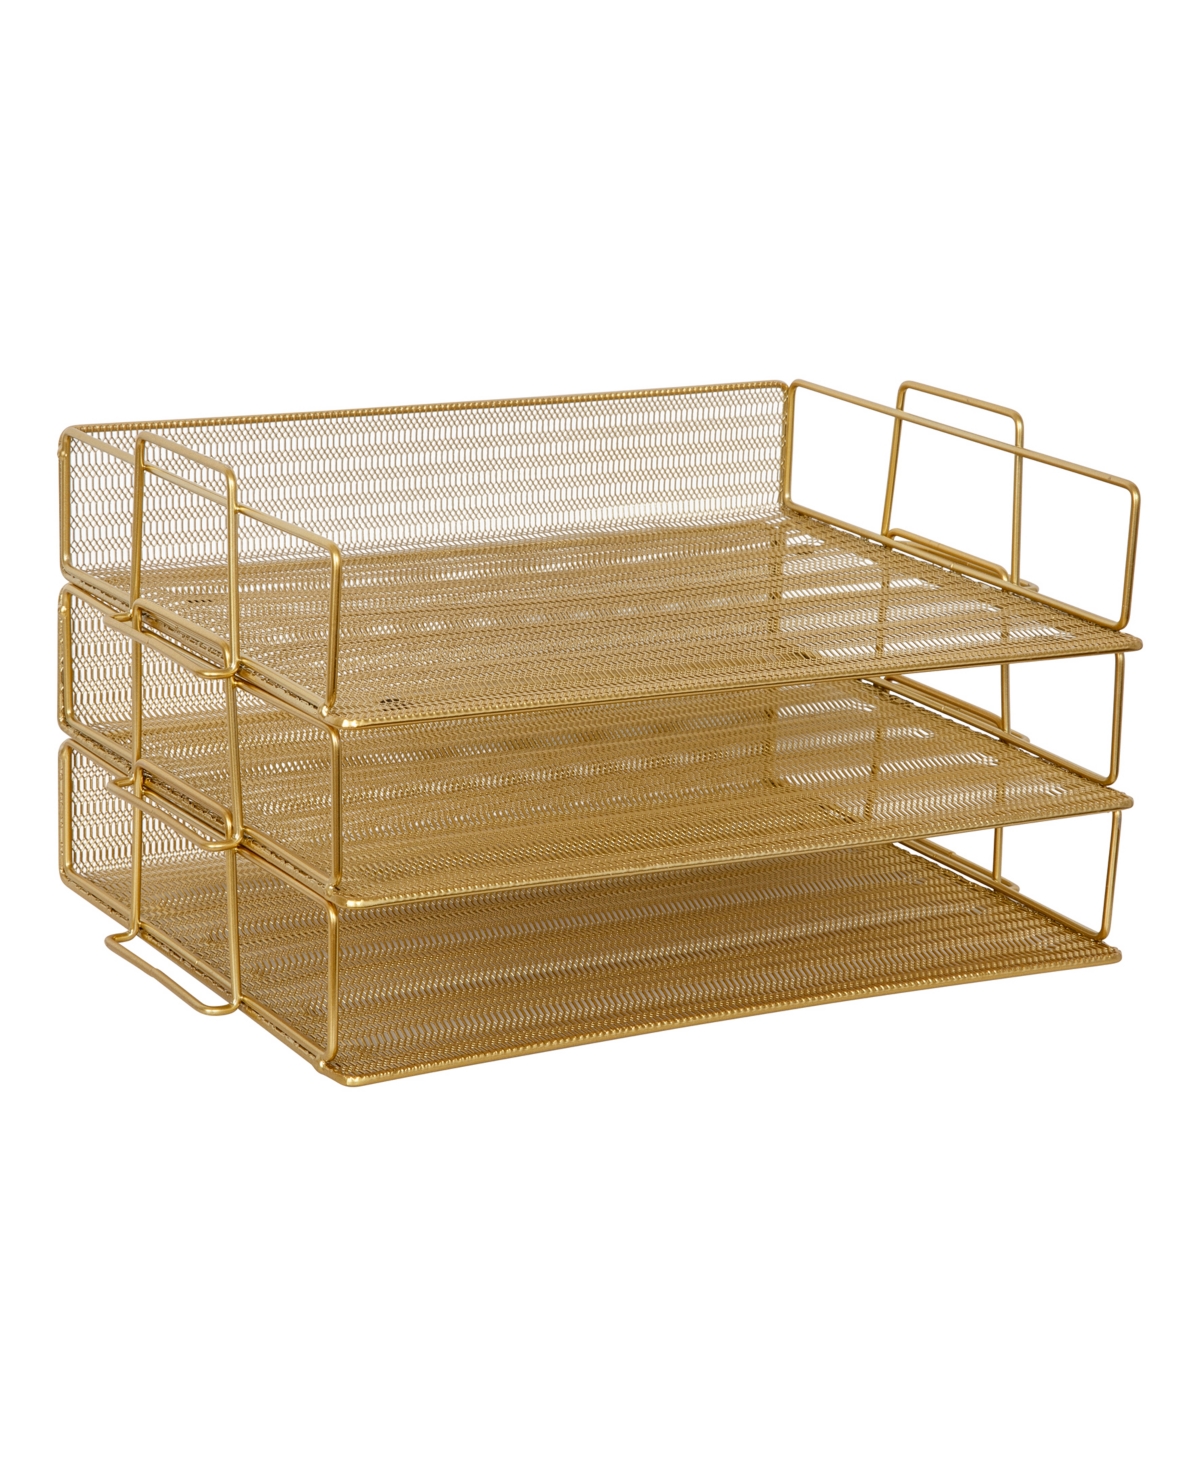 Ryder 3 Tier Desk Letter Tray Organizer, Stackable Steel Mesh Inbox Tray for Files, Papers, or Letters - Gold